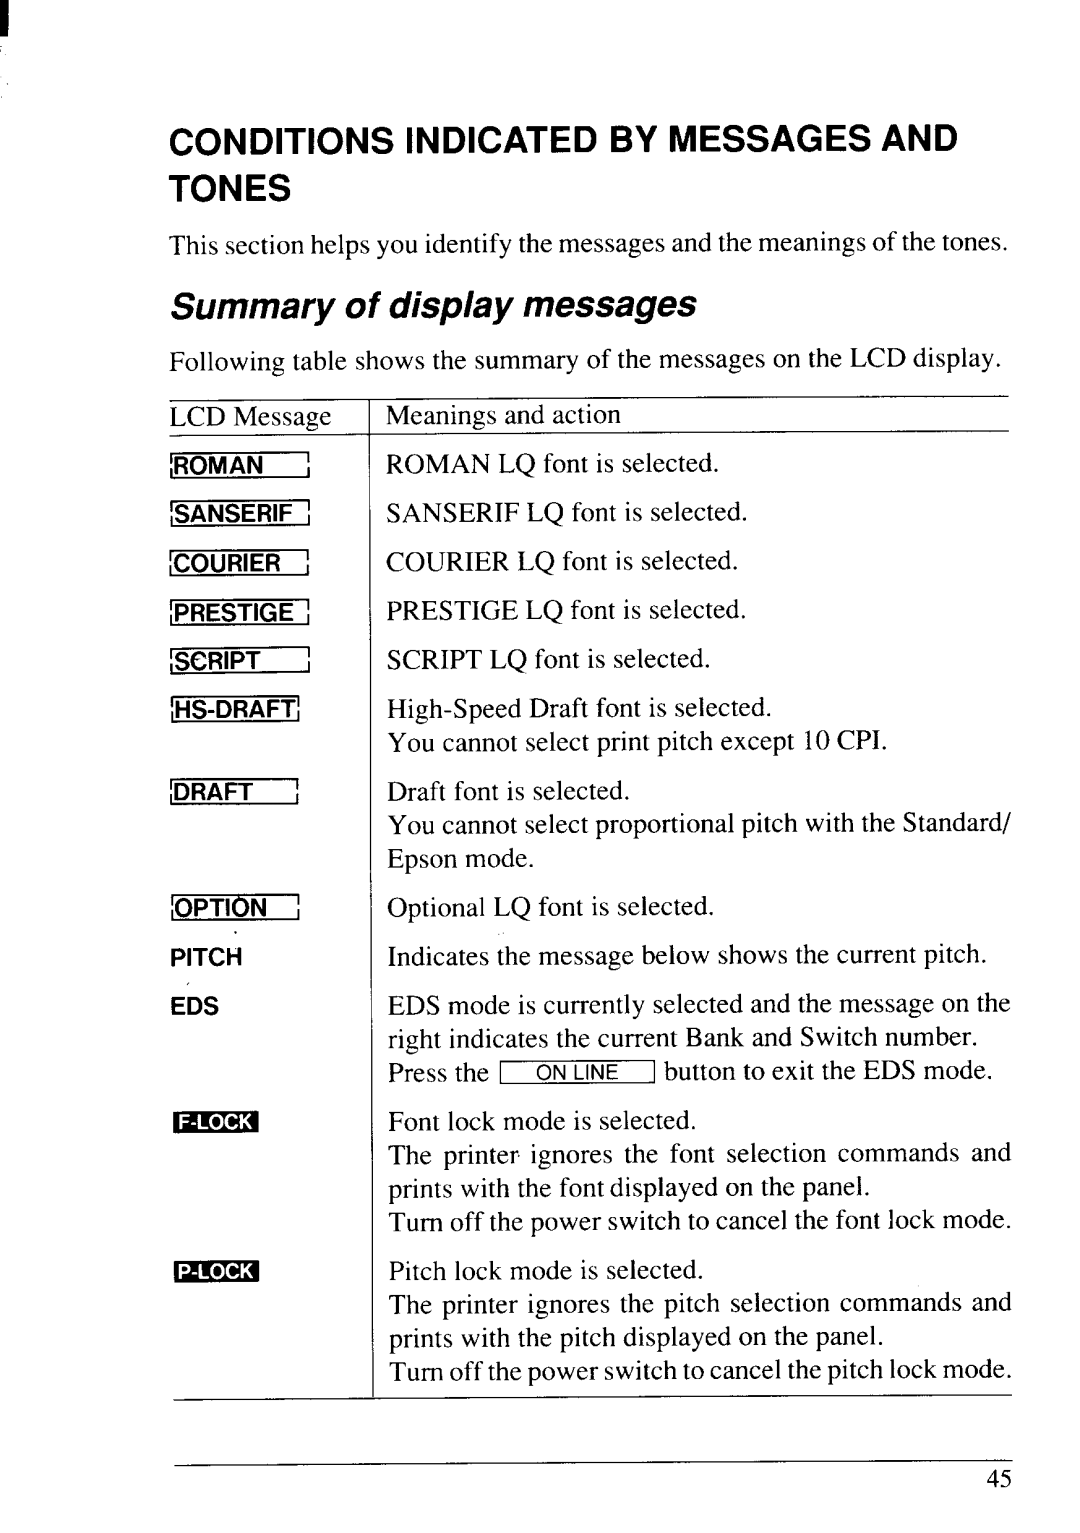 Star Micronics NX-2430 Conditions Indicated By Messages And Tones, Summary of display messages, seRlpTI, Iamii3, Isanserif 